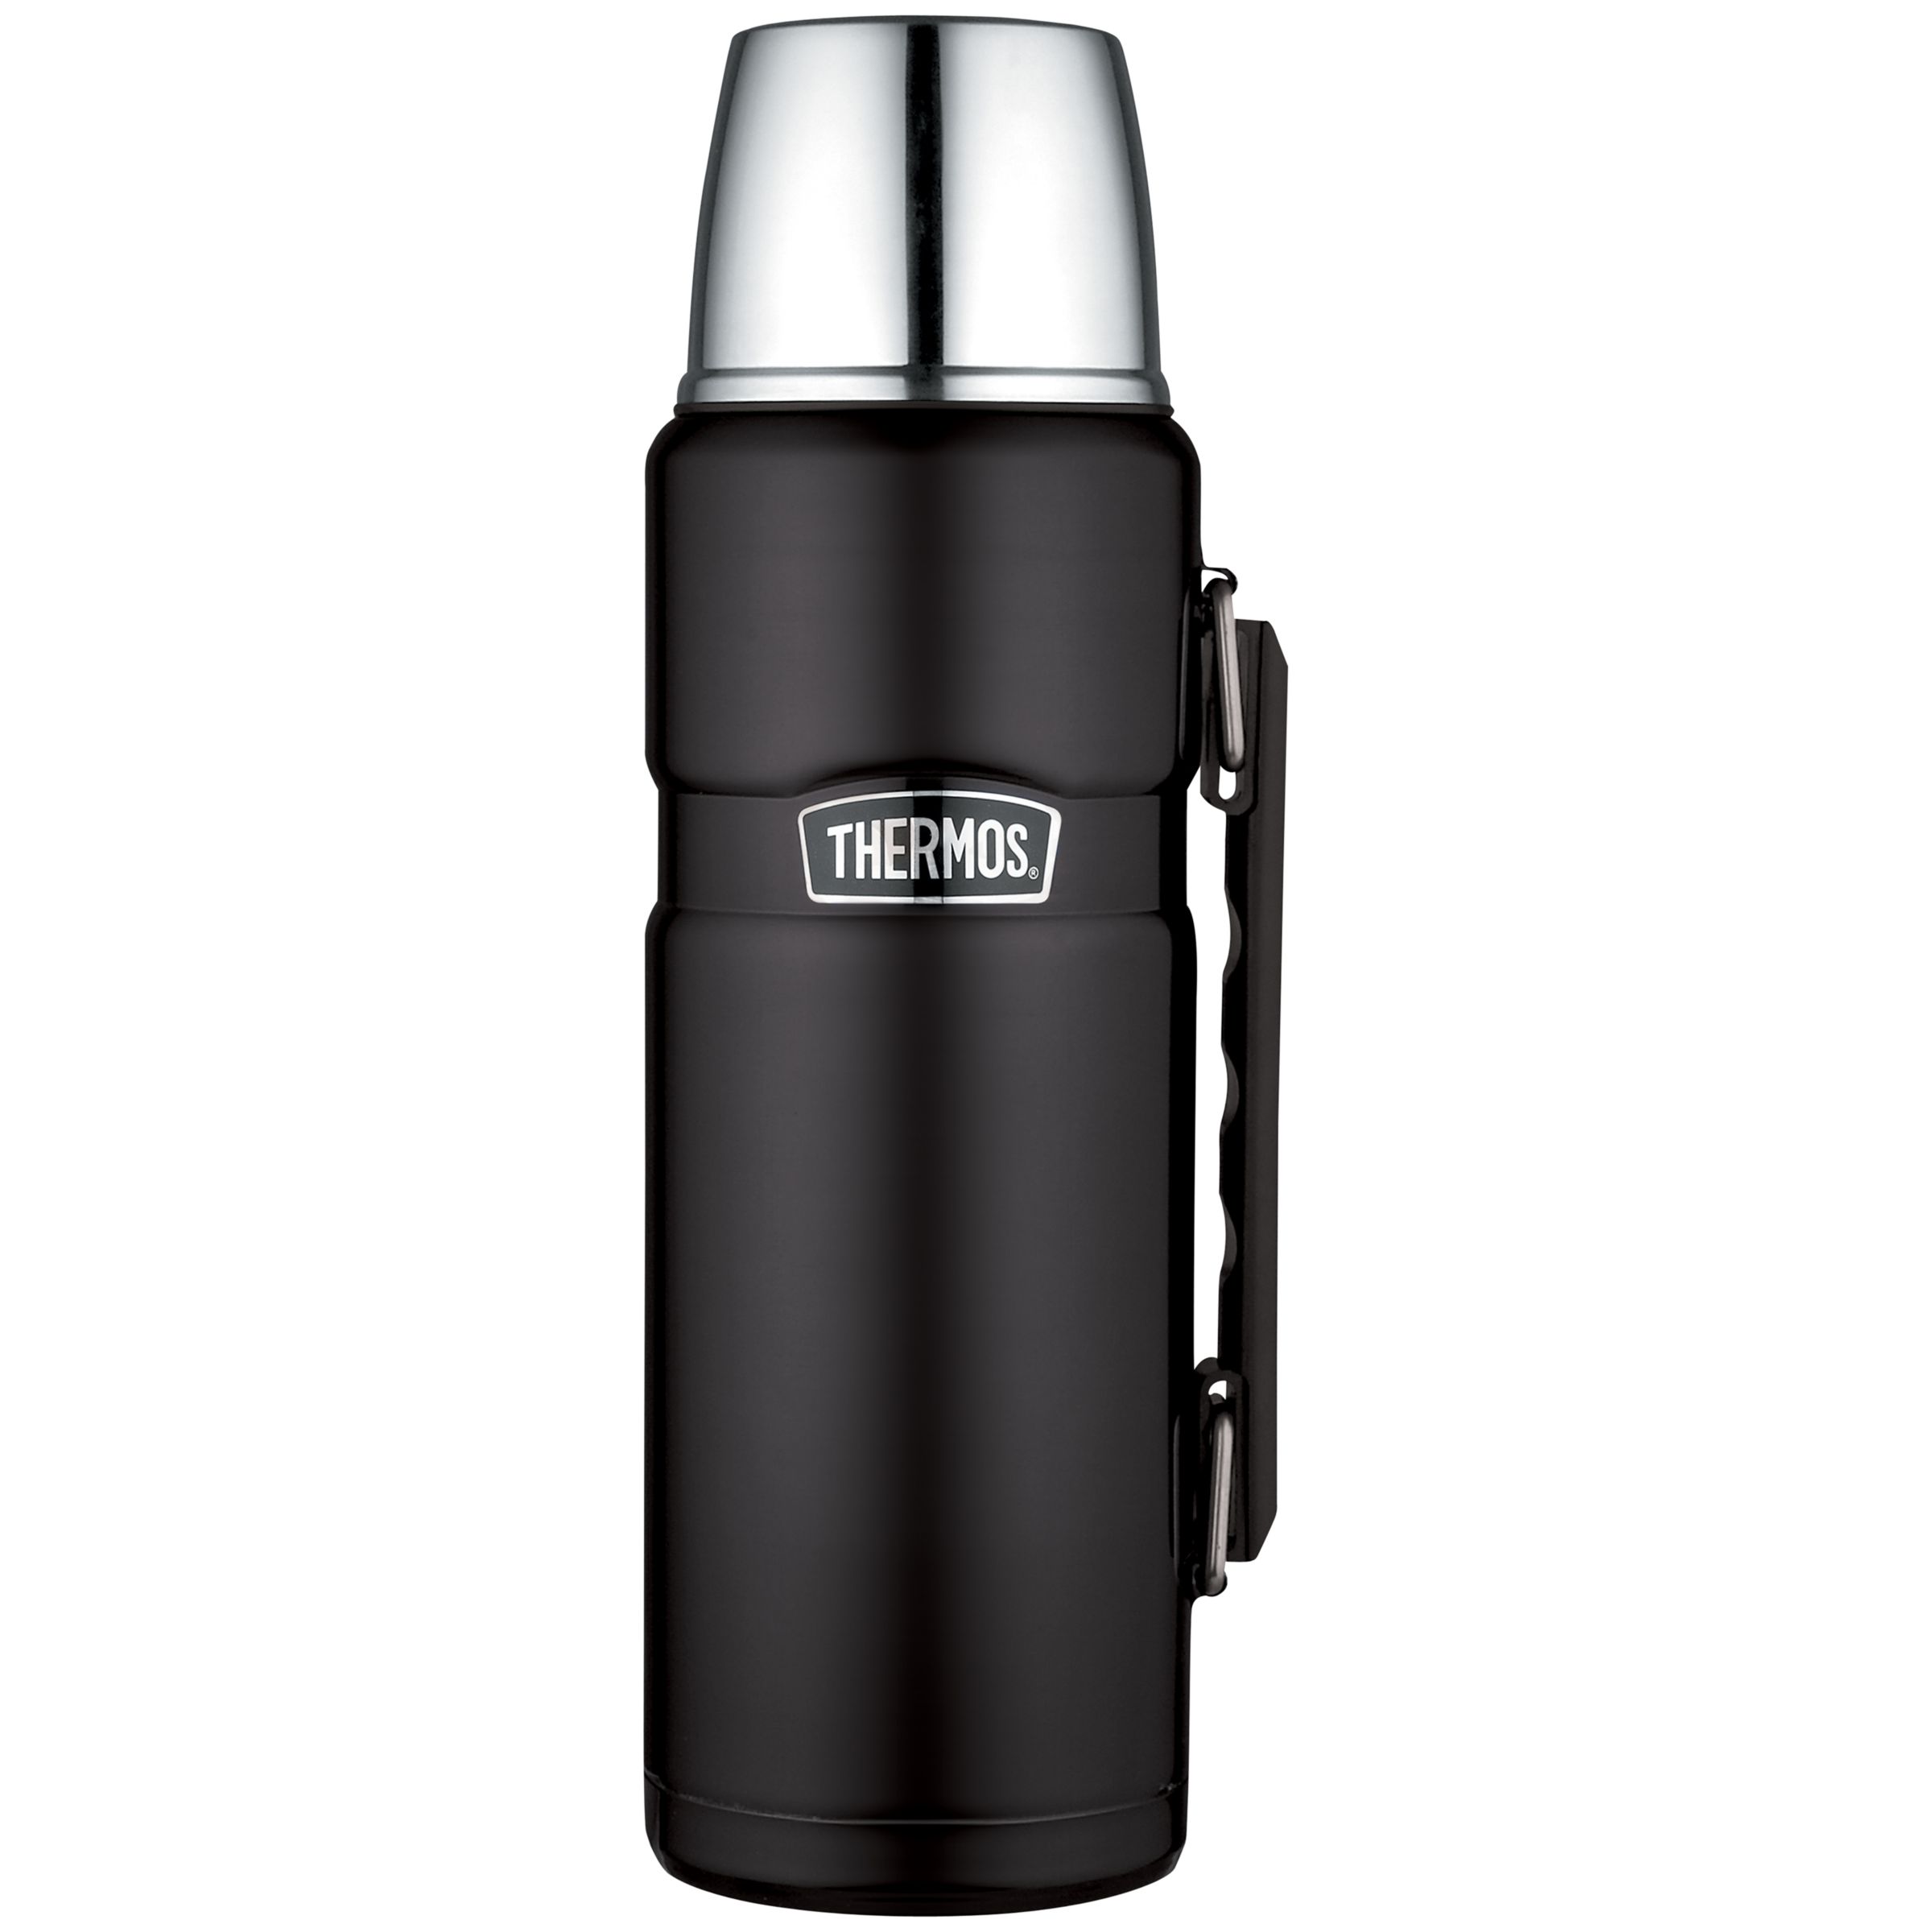 Thermos Vintage Flask, 1.2L